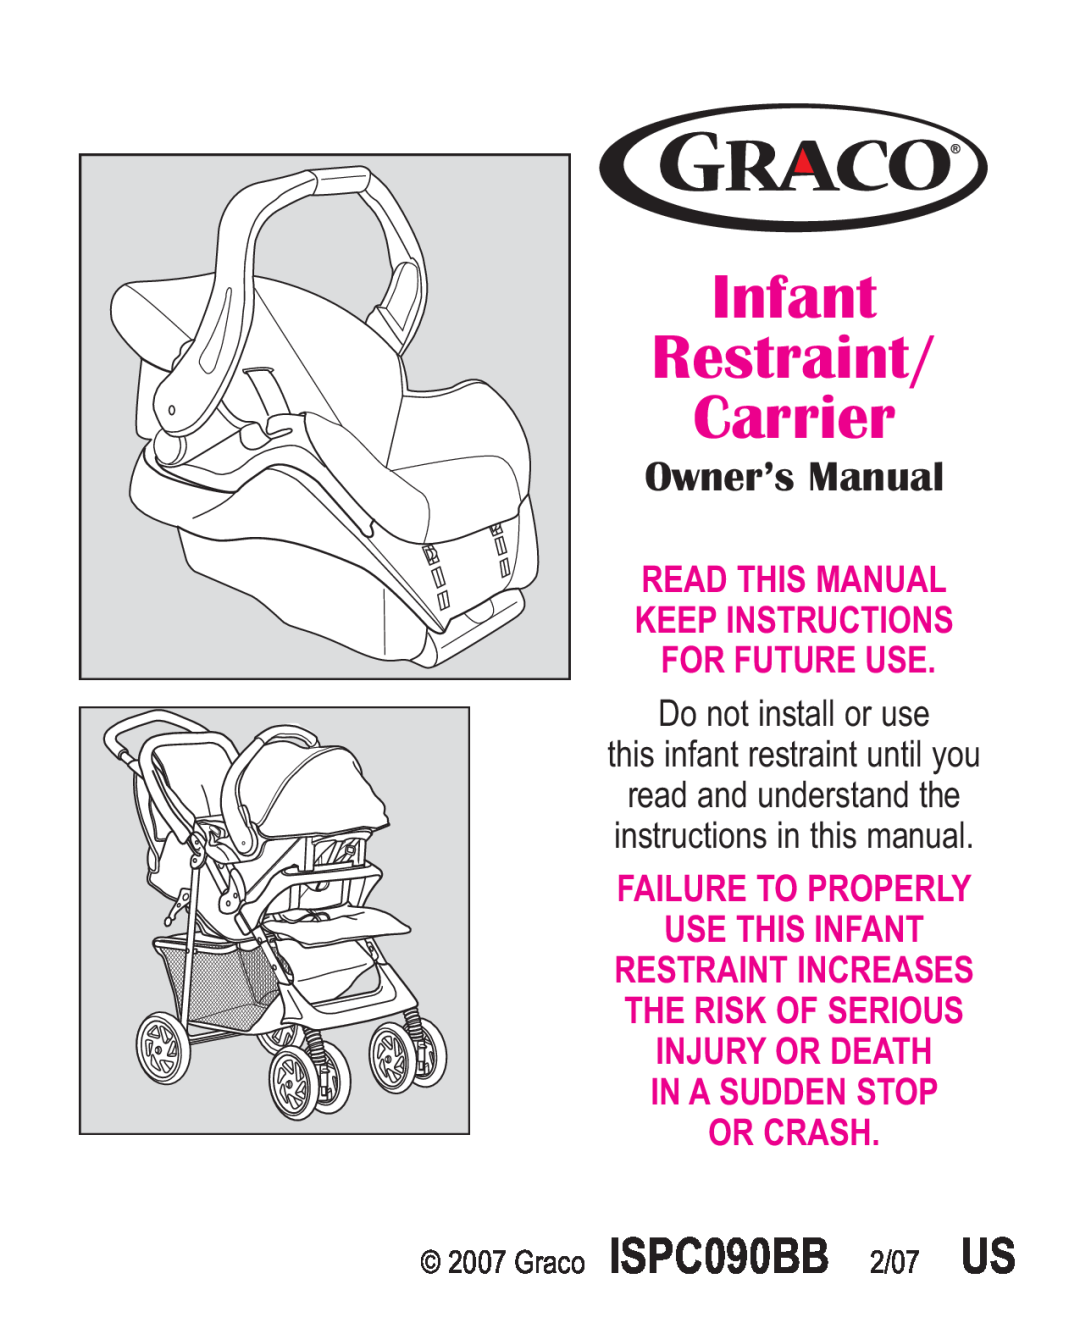 Graco ISPA338AA owner manual Infant Restraint Carrier, Owner’s Manual, Read This Manual Keep Instructions For Future Use 